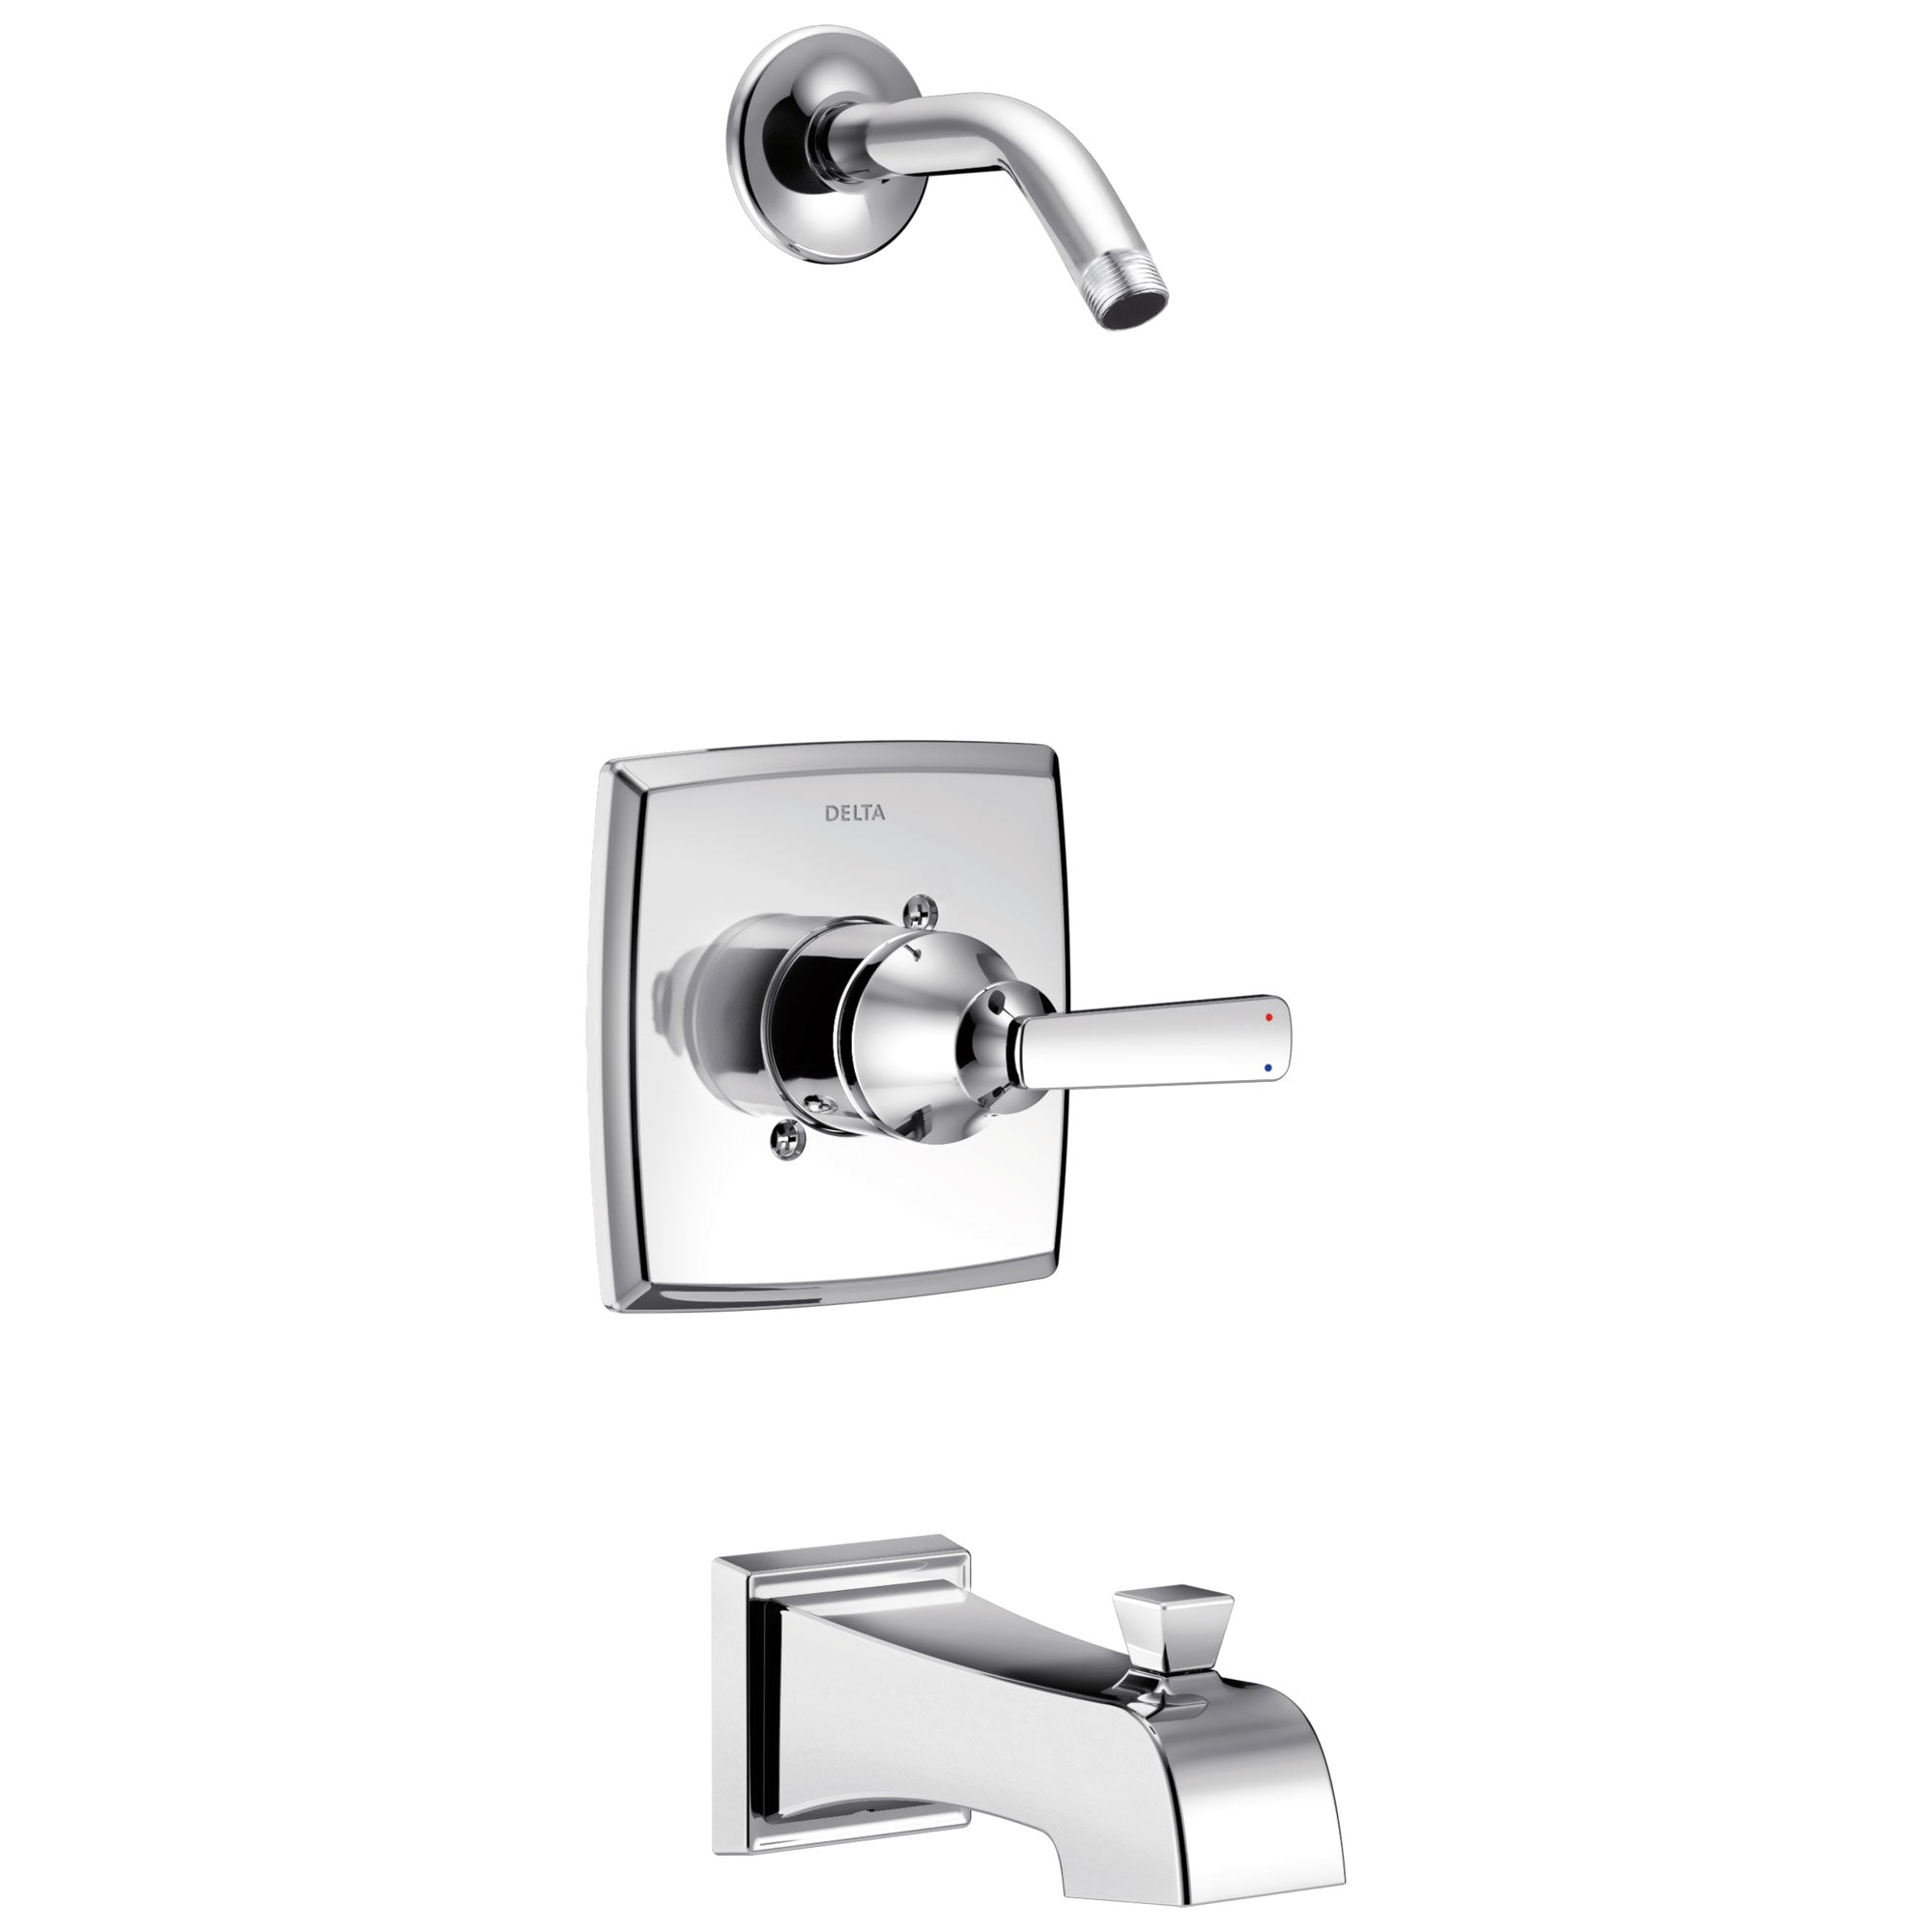 Delta Ashlyn Collection Chrome Monitor 14 Stylish Tub and Shower Combination Faucet Trim - Less Showerhead Includes Valve with Stops D2392V